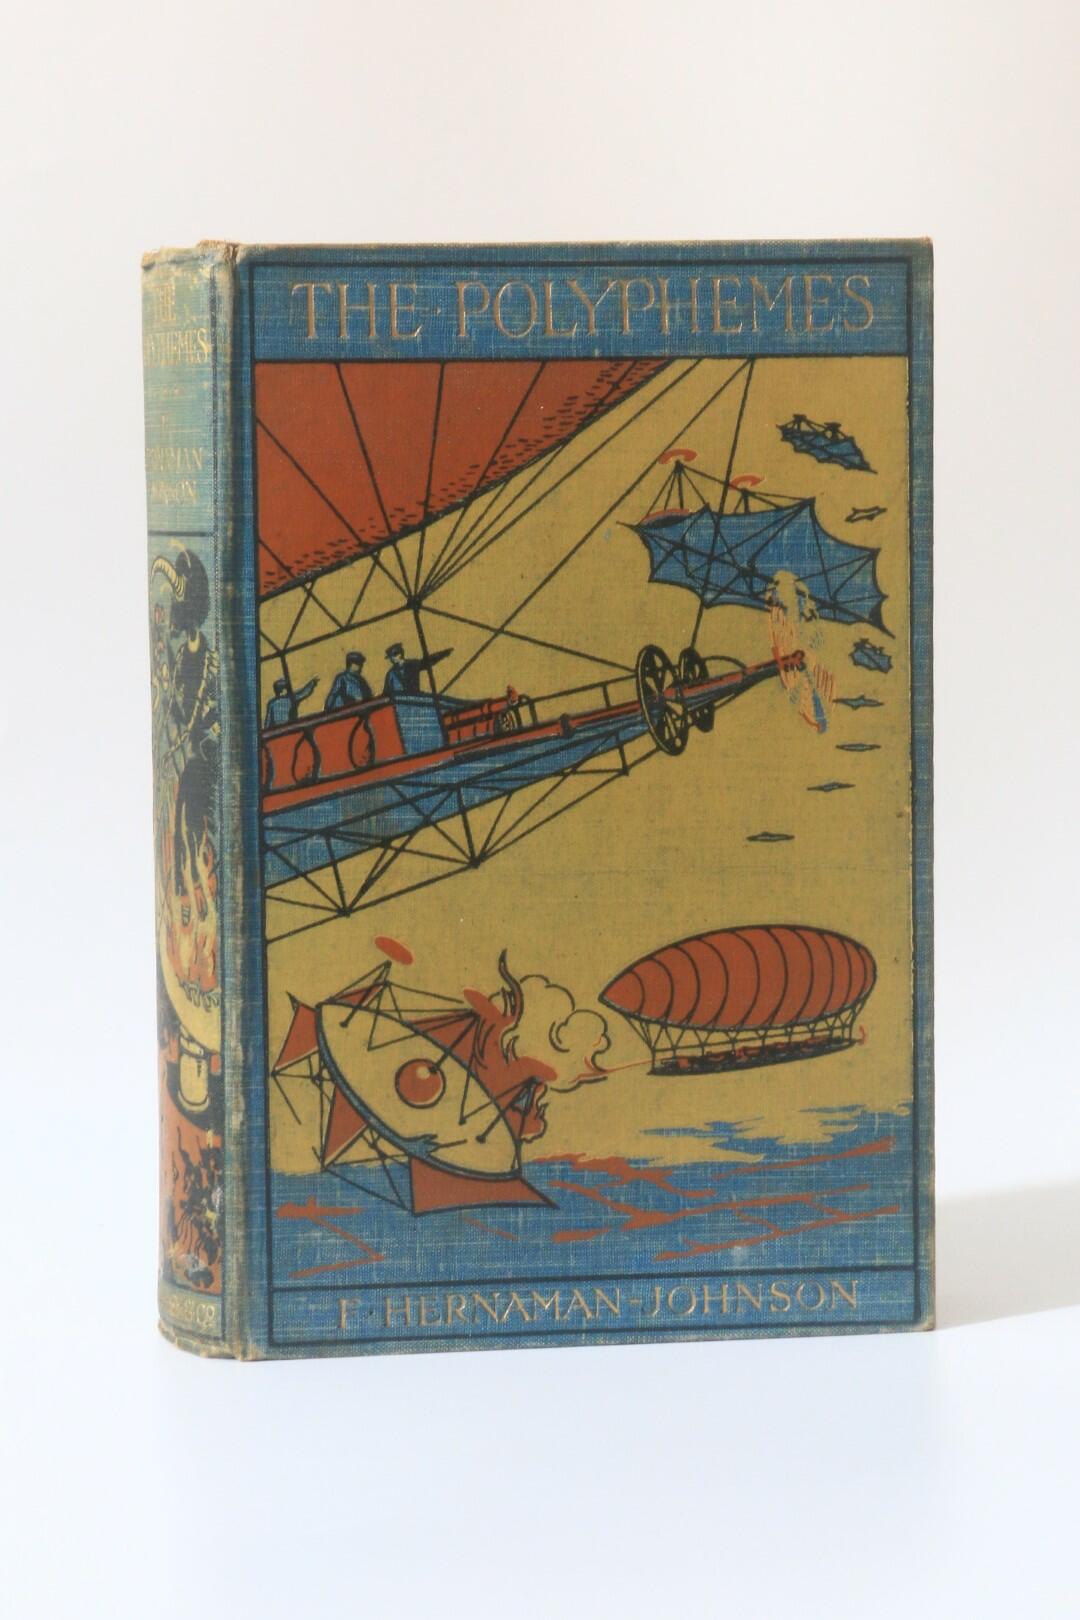 F Hernaman-Johnson - The Polyphemes: A Story of Strange Adventures Among Strange Beings - Ward, Lock & Co., 1906, First Edition.